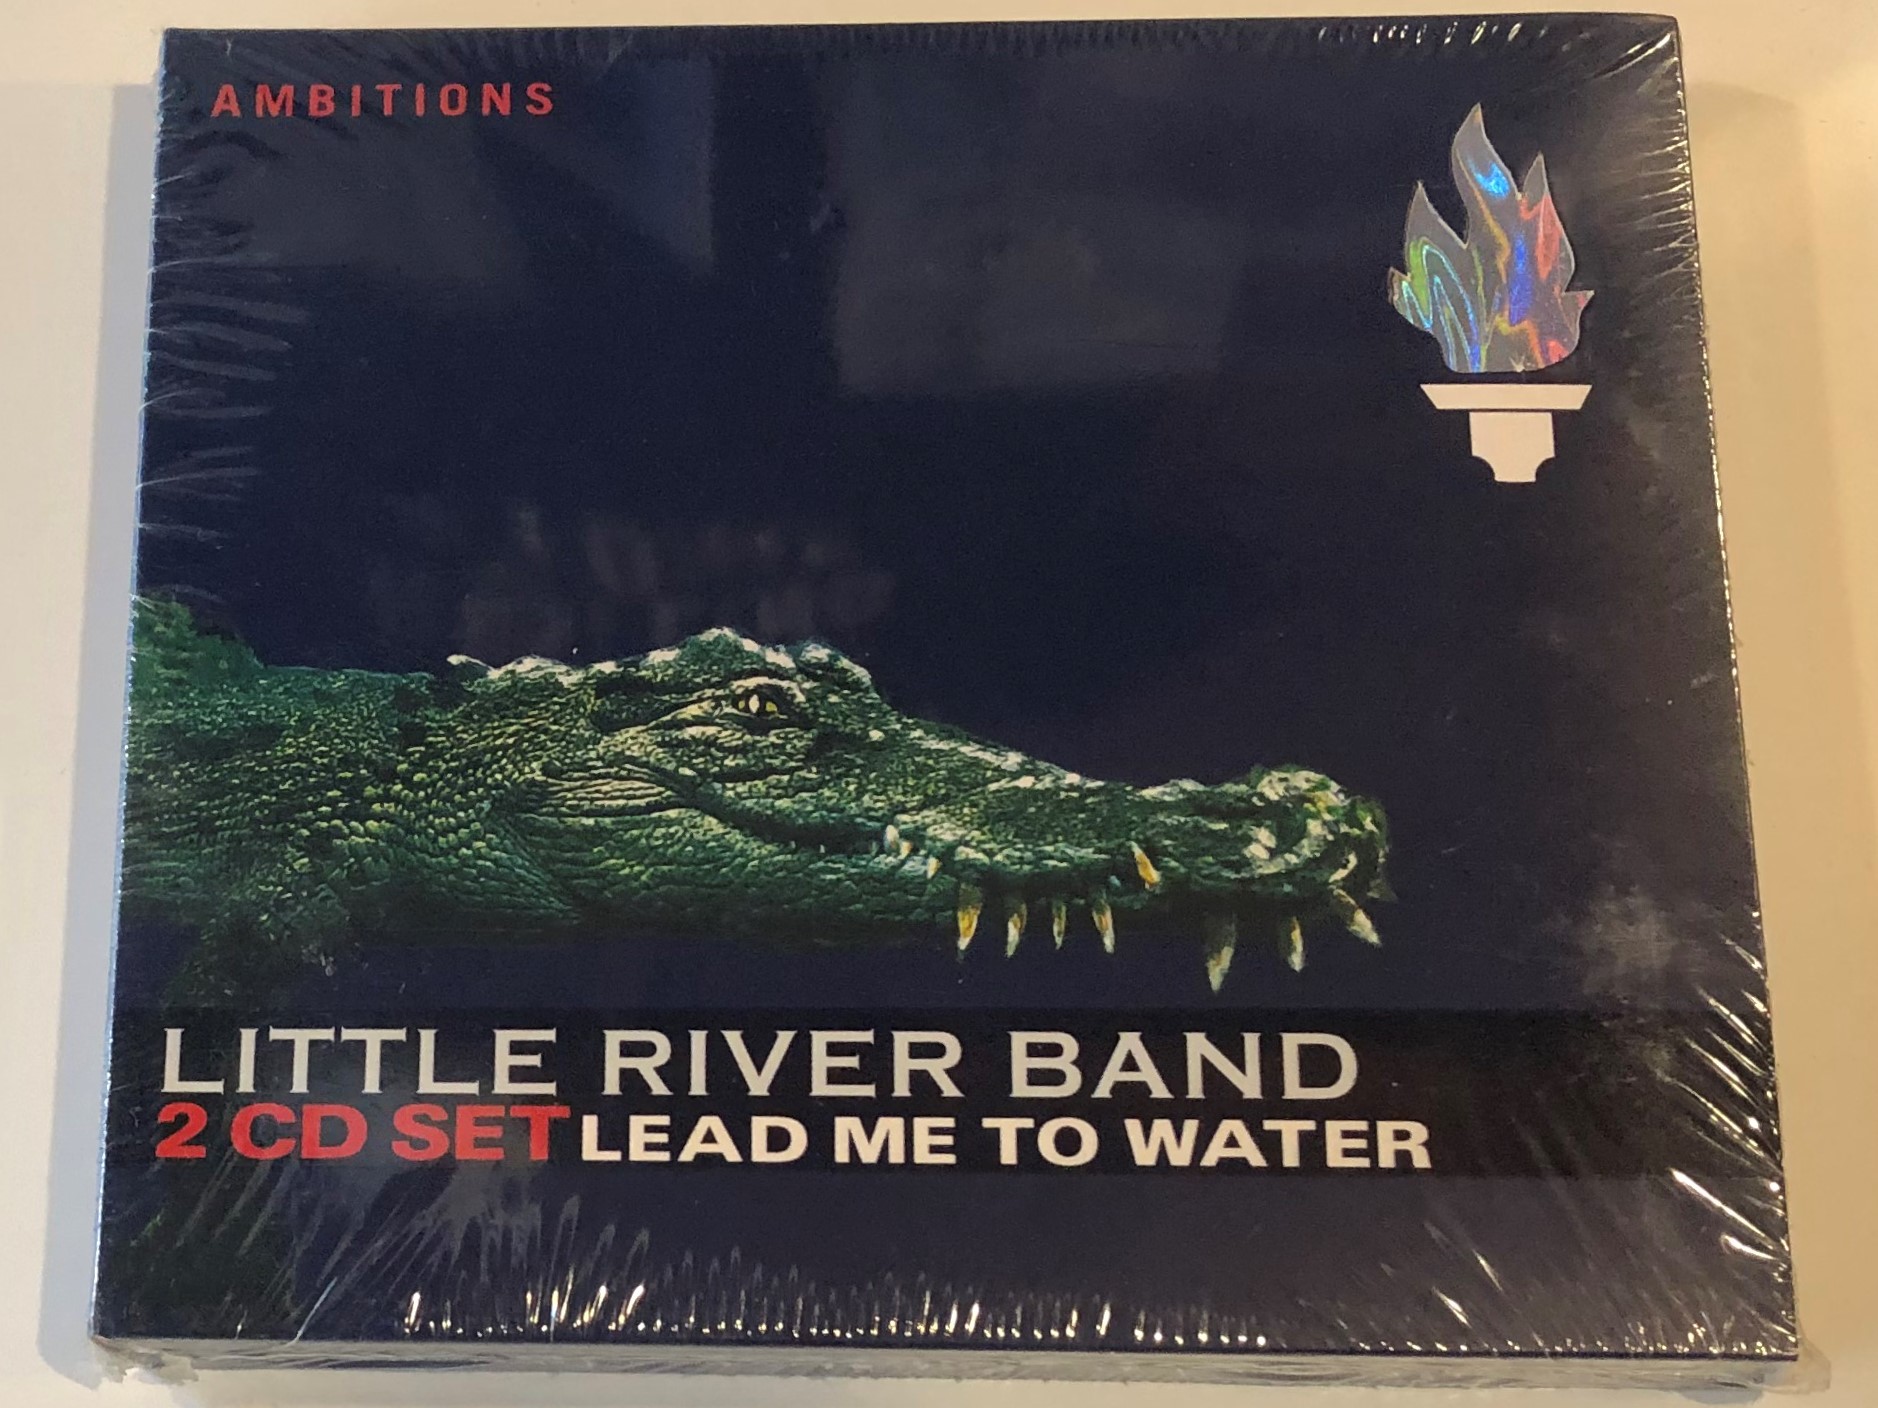 little-river-band-lead-me-to-water-ambitions-2x-audio-cd-set-223128-311-1-.jpg